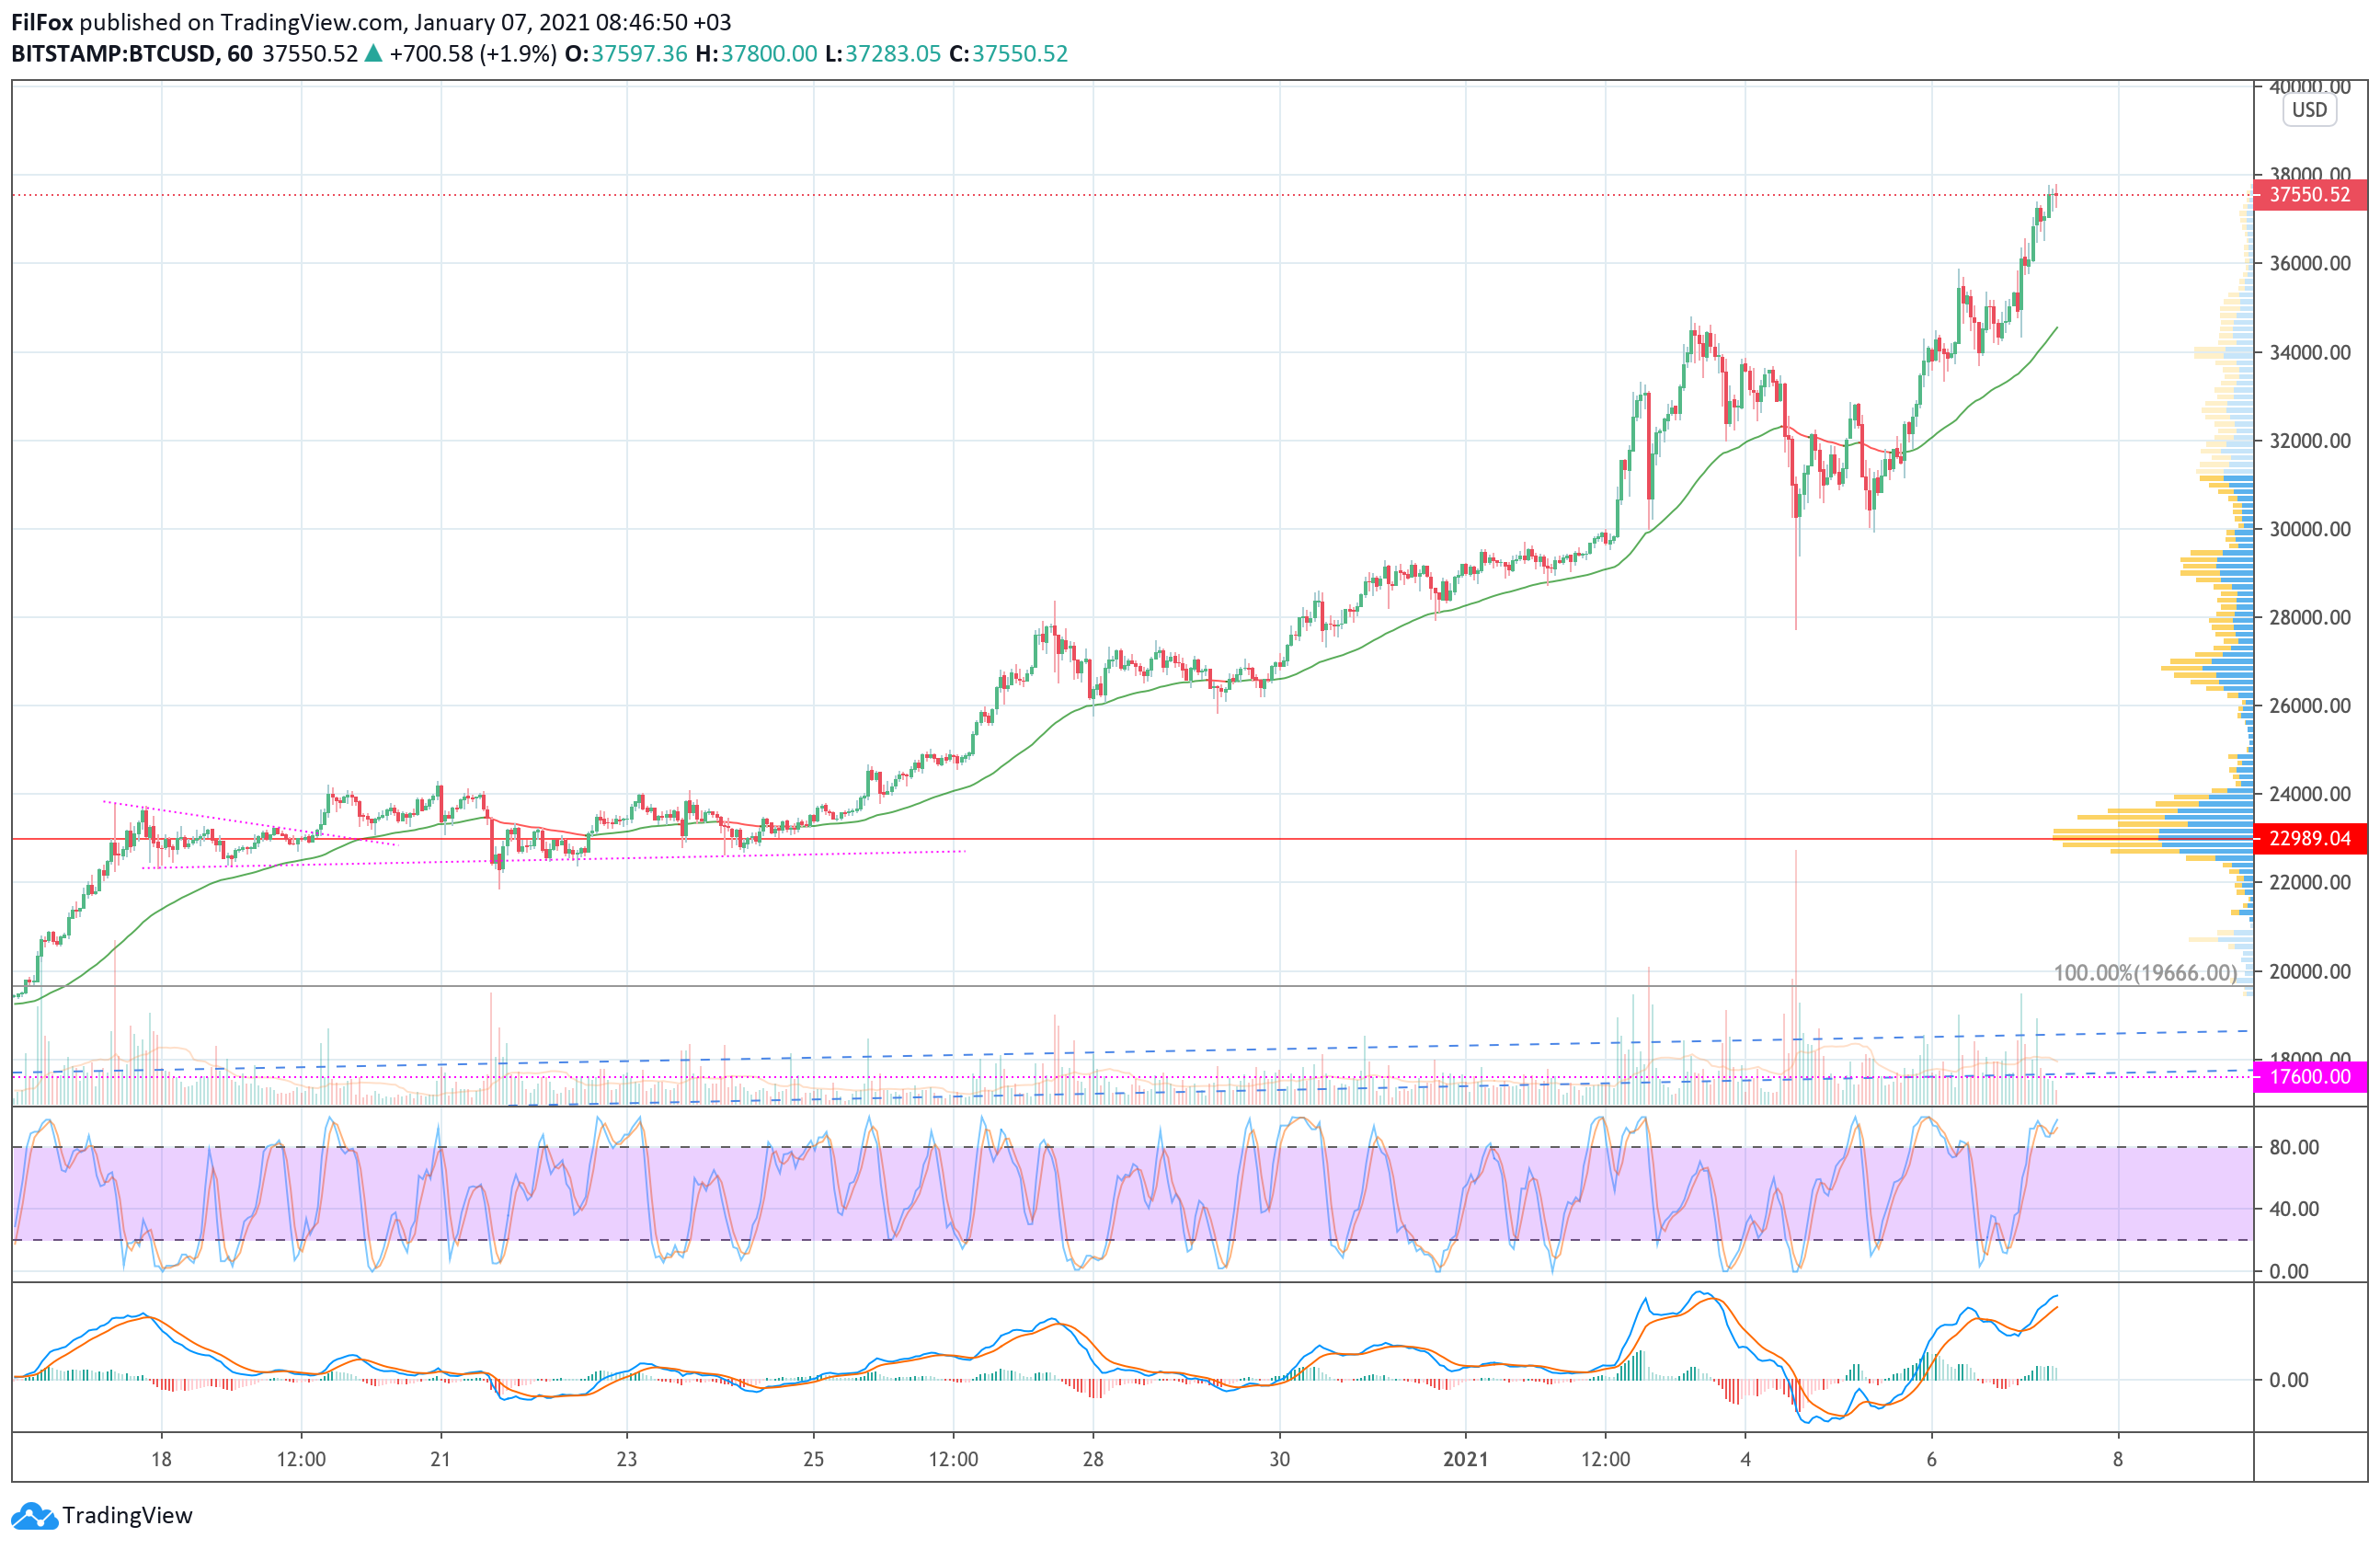 Analysis of prices for Bitcoin, Ethereum, Ripple for 01/07/2021